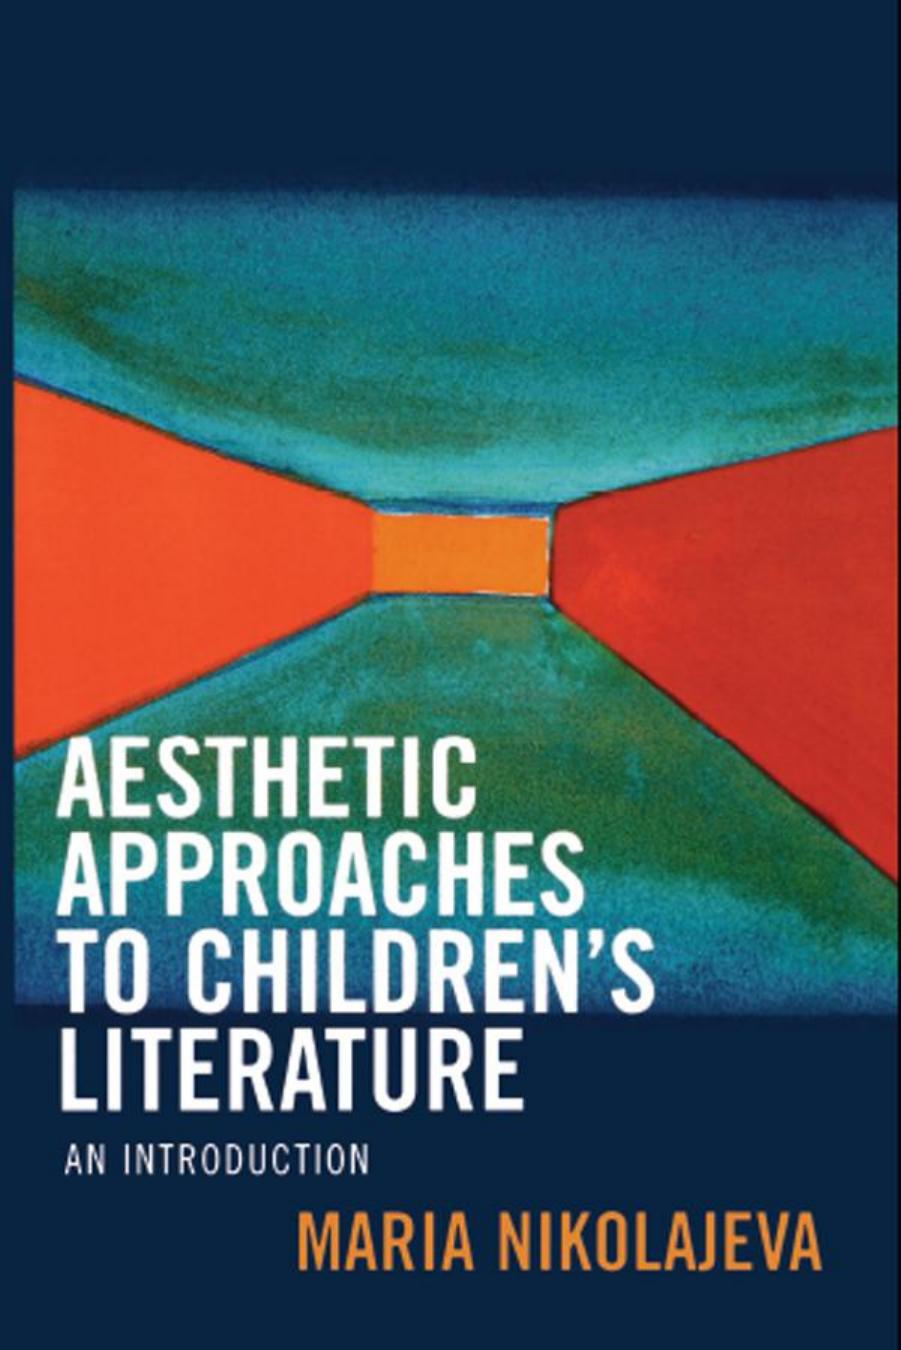 Aesthetic Approaches to Children s Literature An Introduction  by Maria Nikolajeva